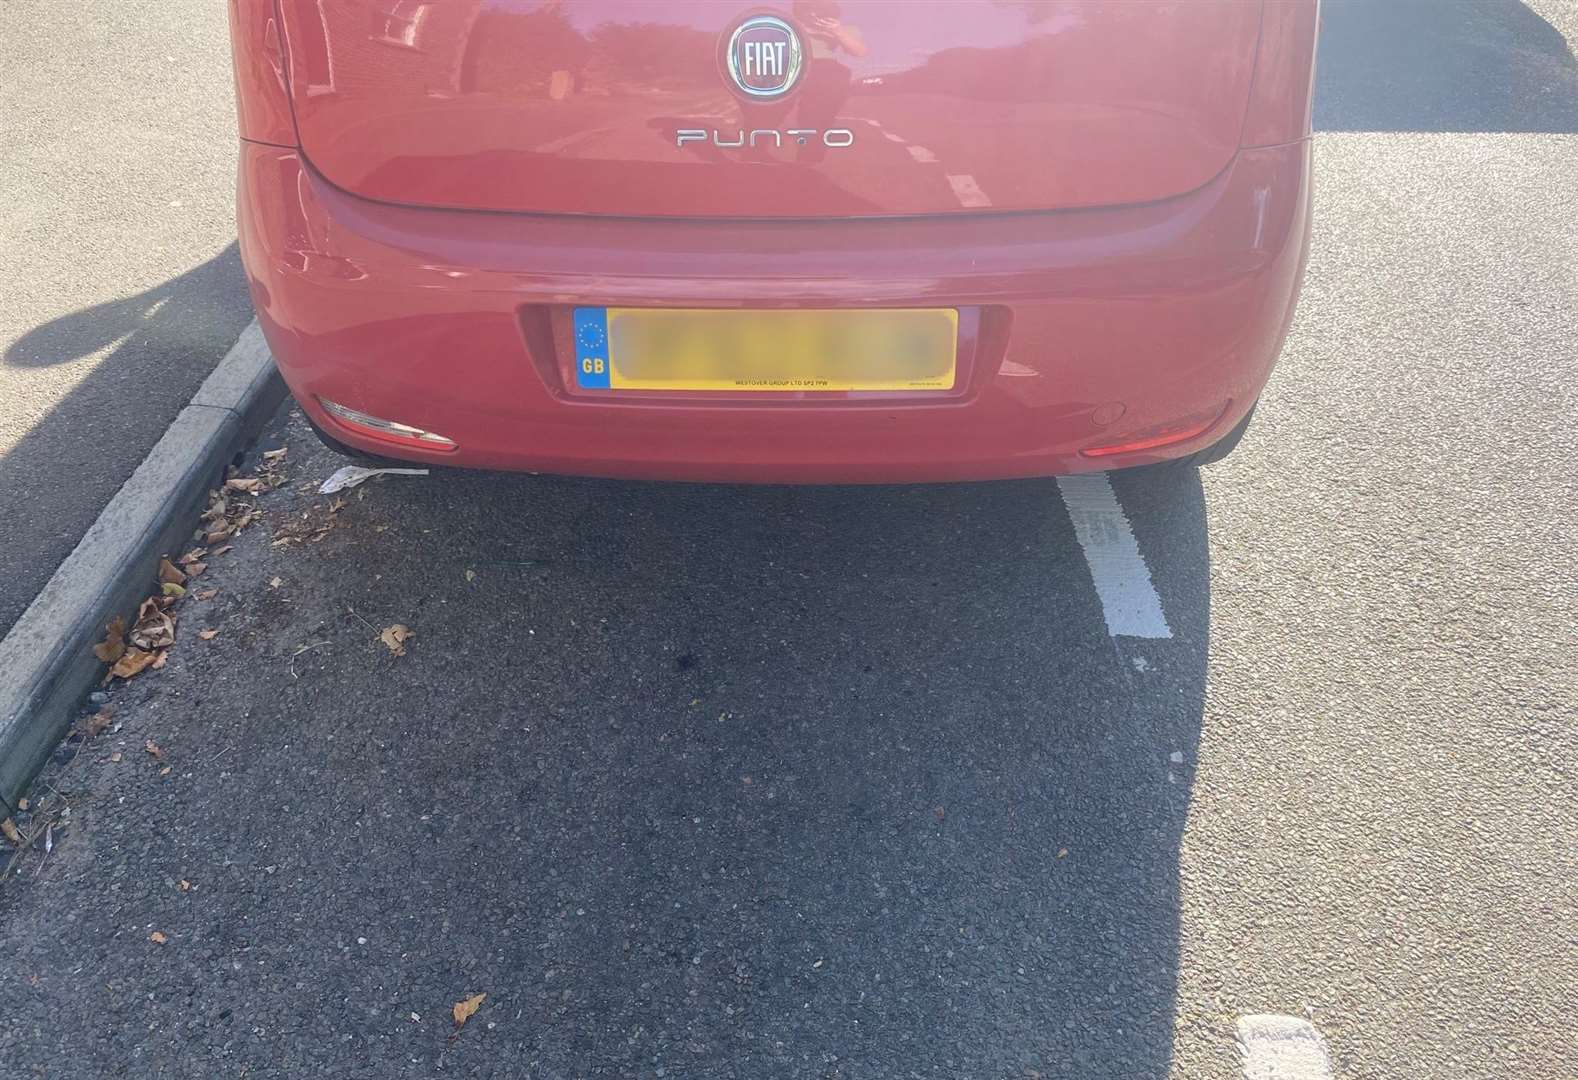 Even a Fiat Punto couldn't fit